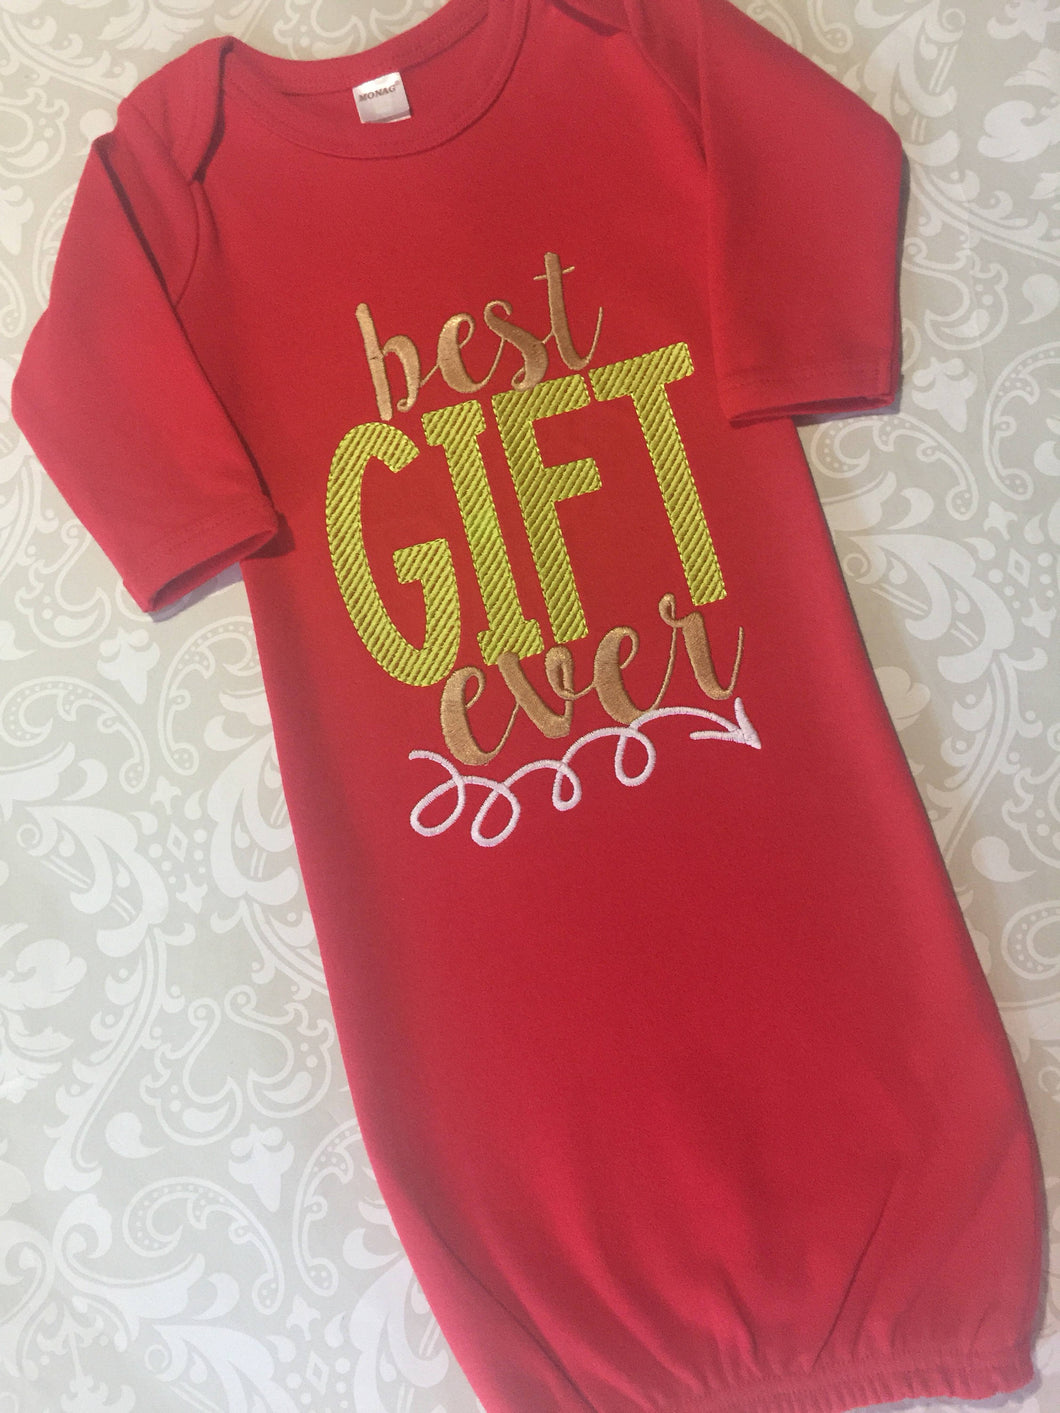 Best Gift Ever Christmas baby gown